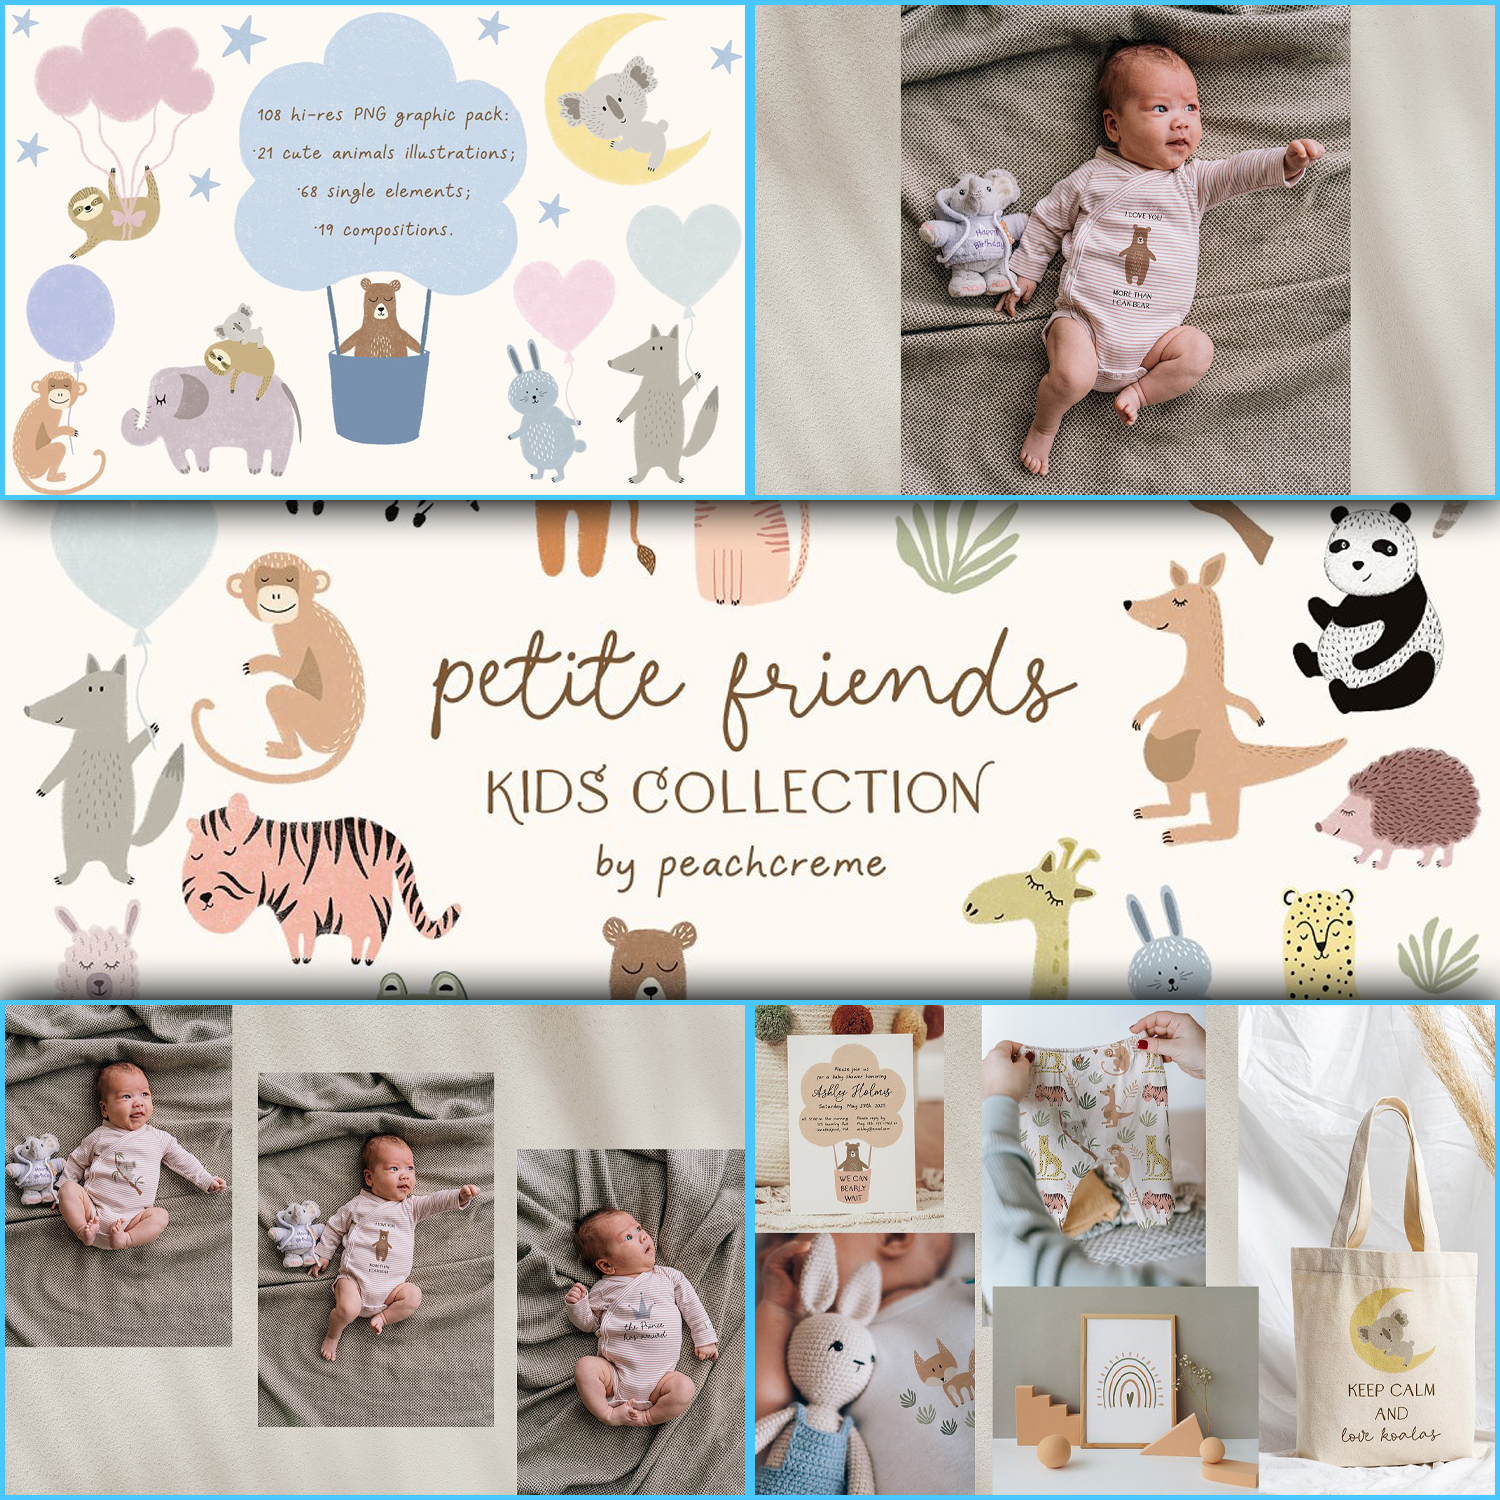 Images with petite friends kids collection.